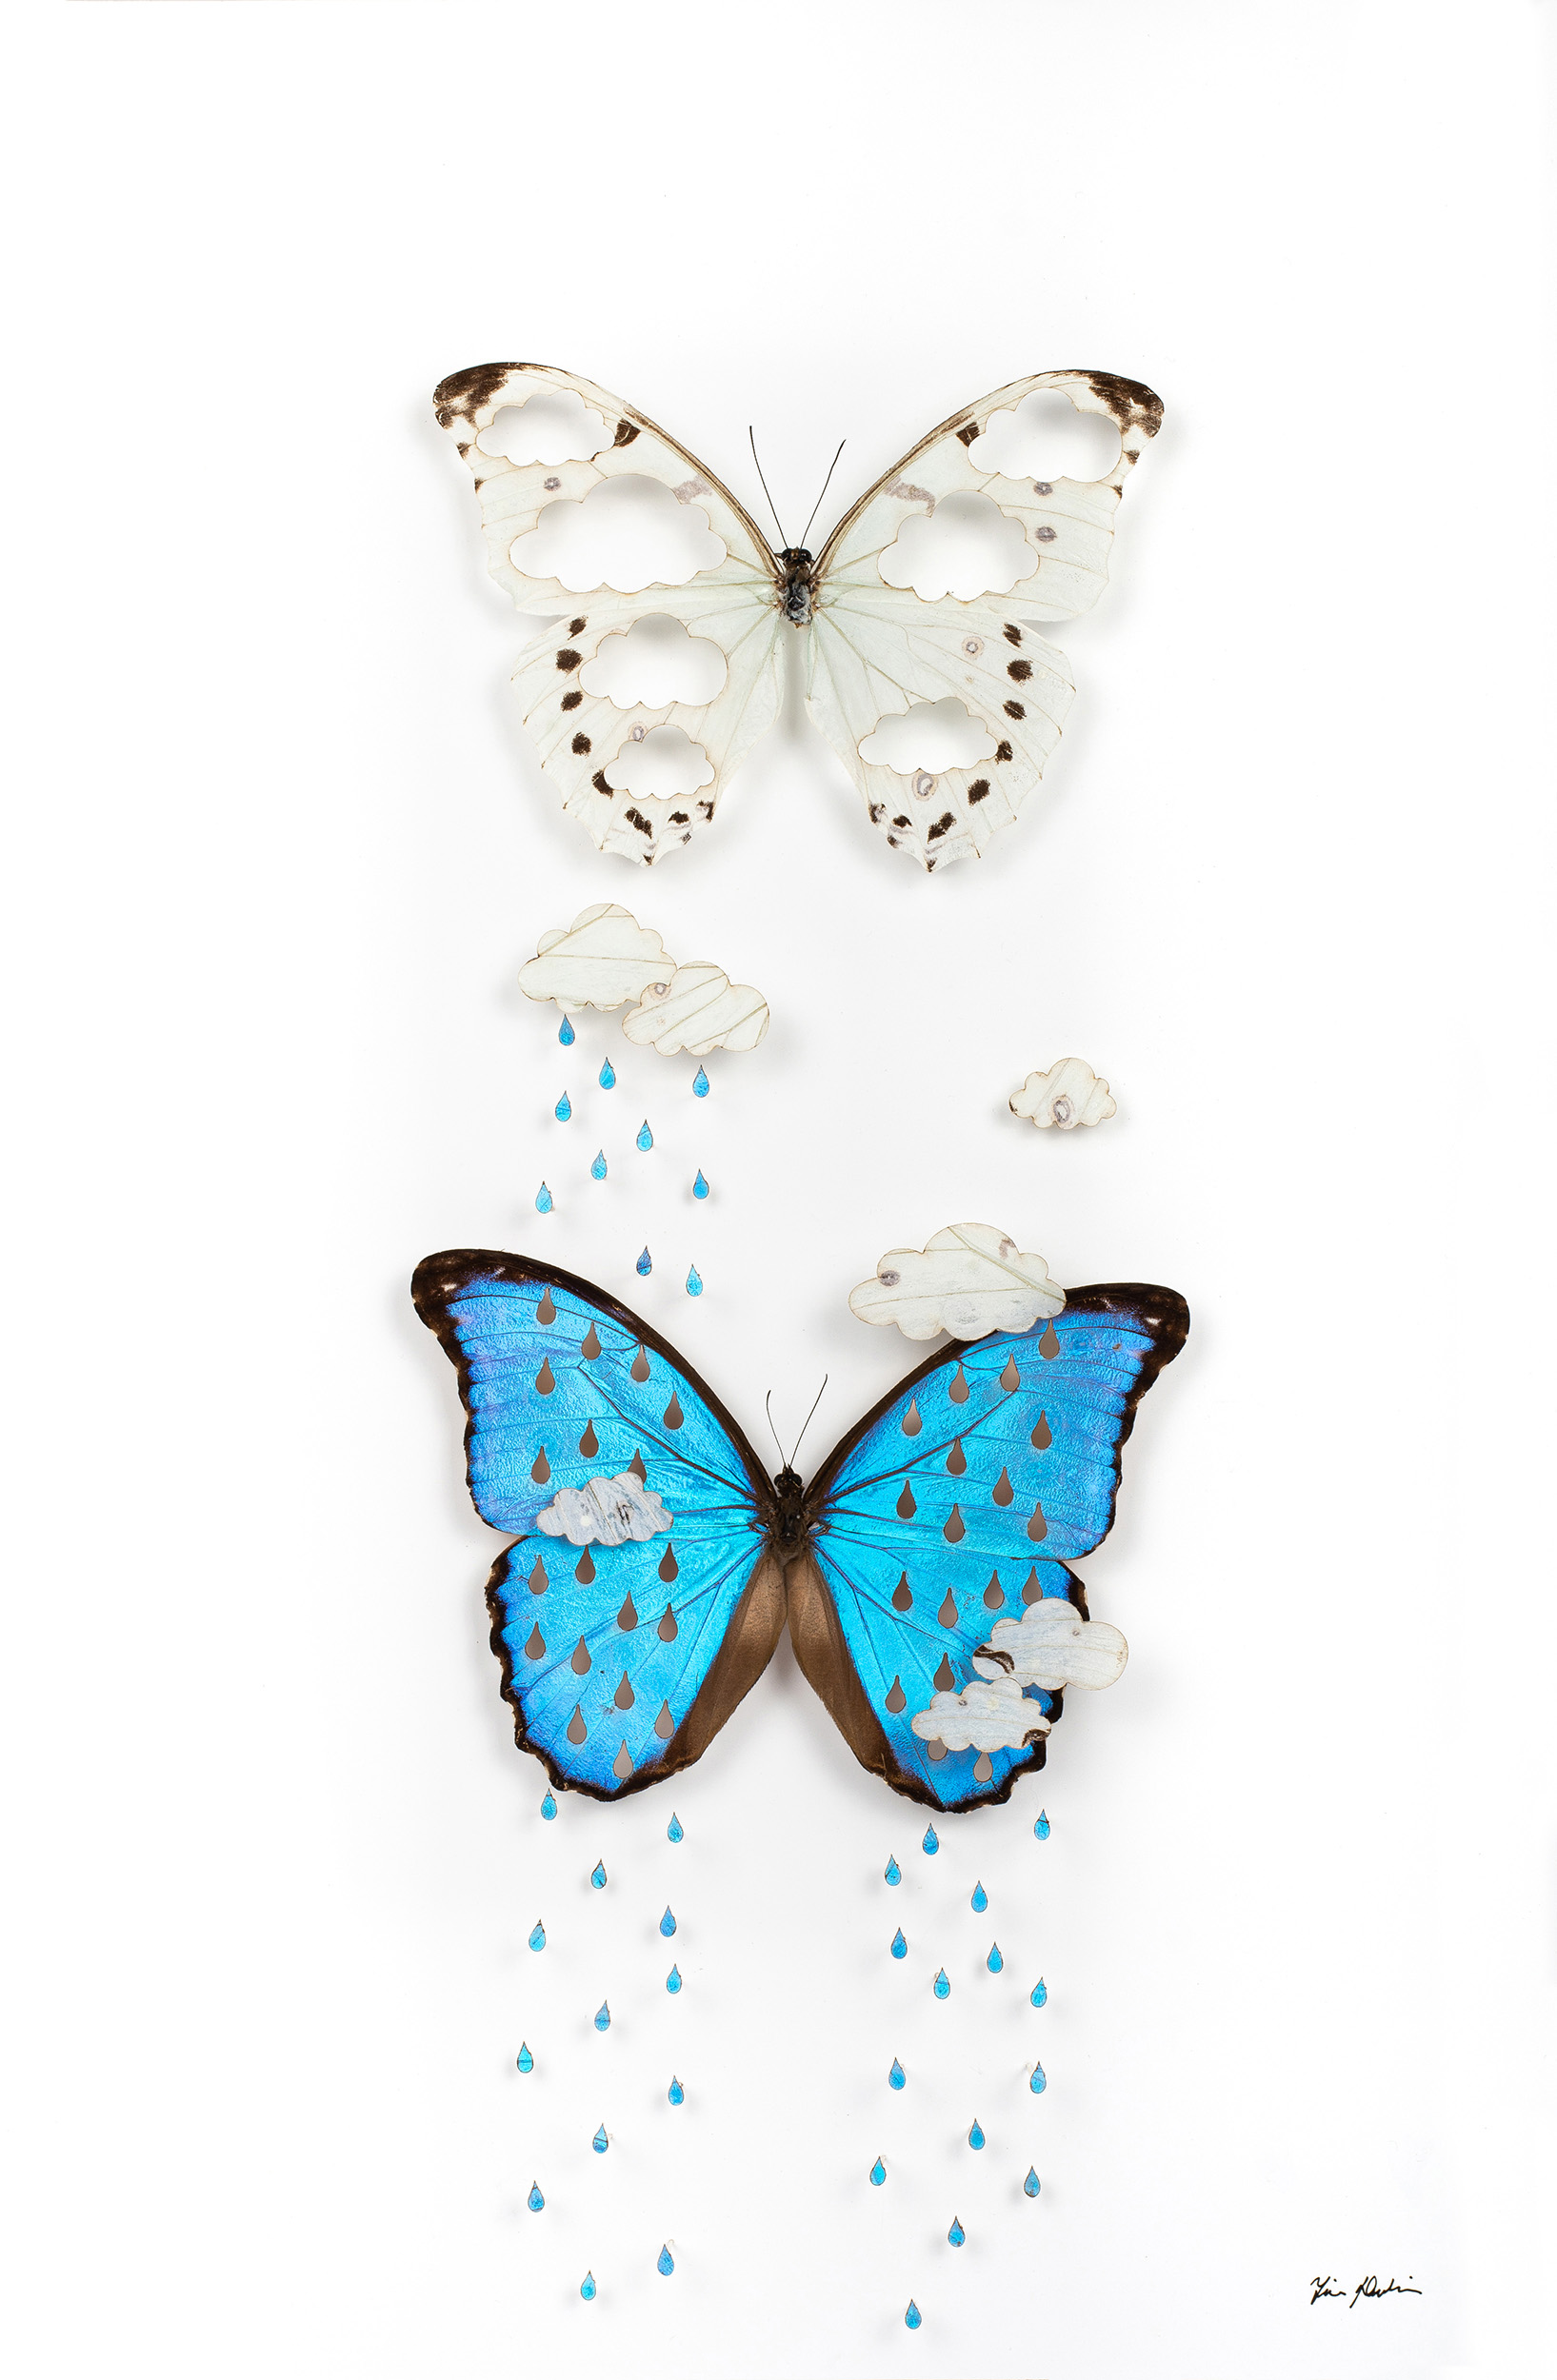 A image of Weathervein, a piece made of a white and blue morpho with raindrops and clouds cut from the wings.